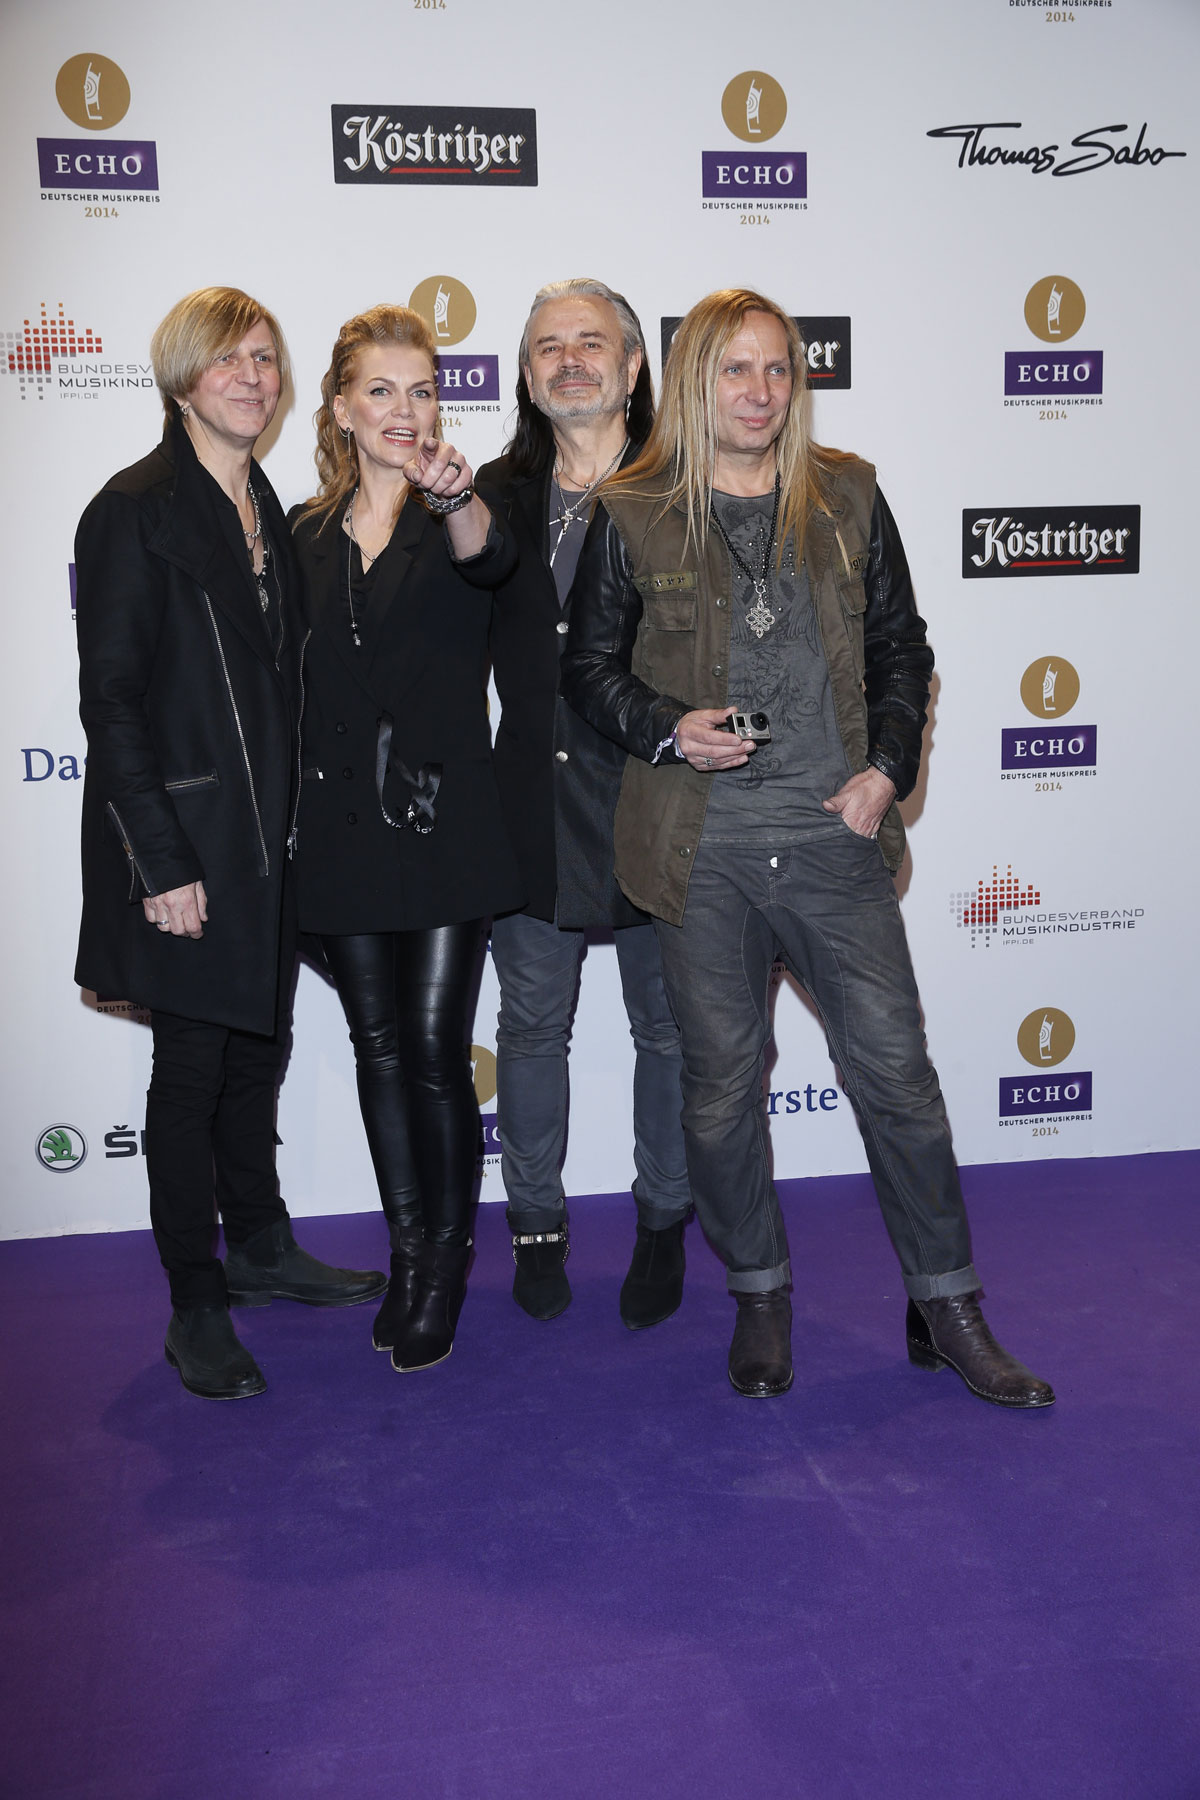 Anna Loos attends the Echo award 2014